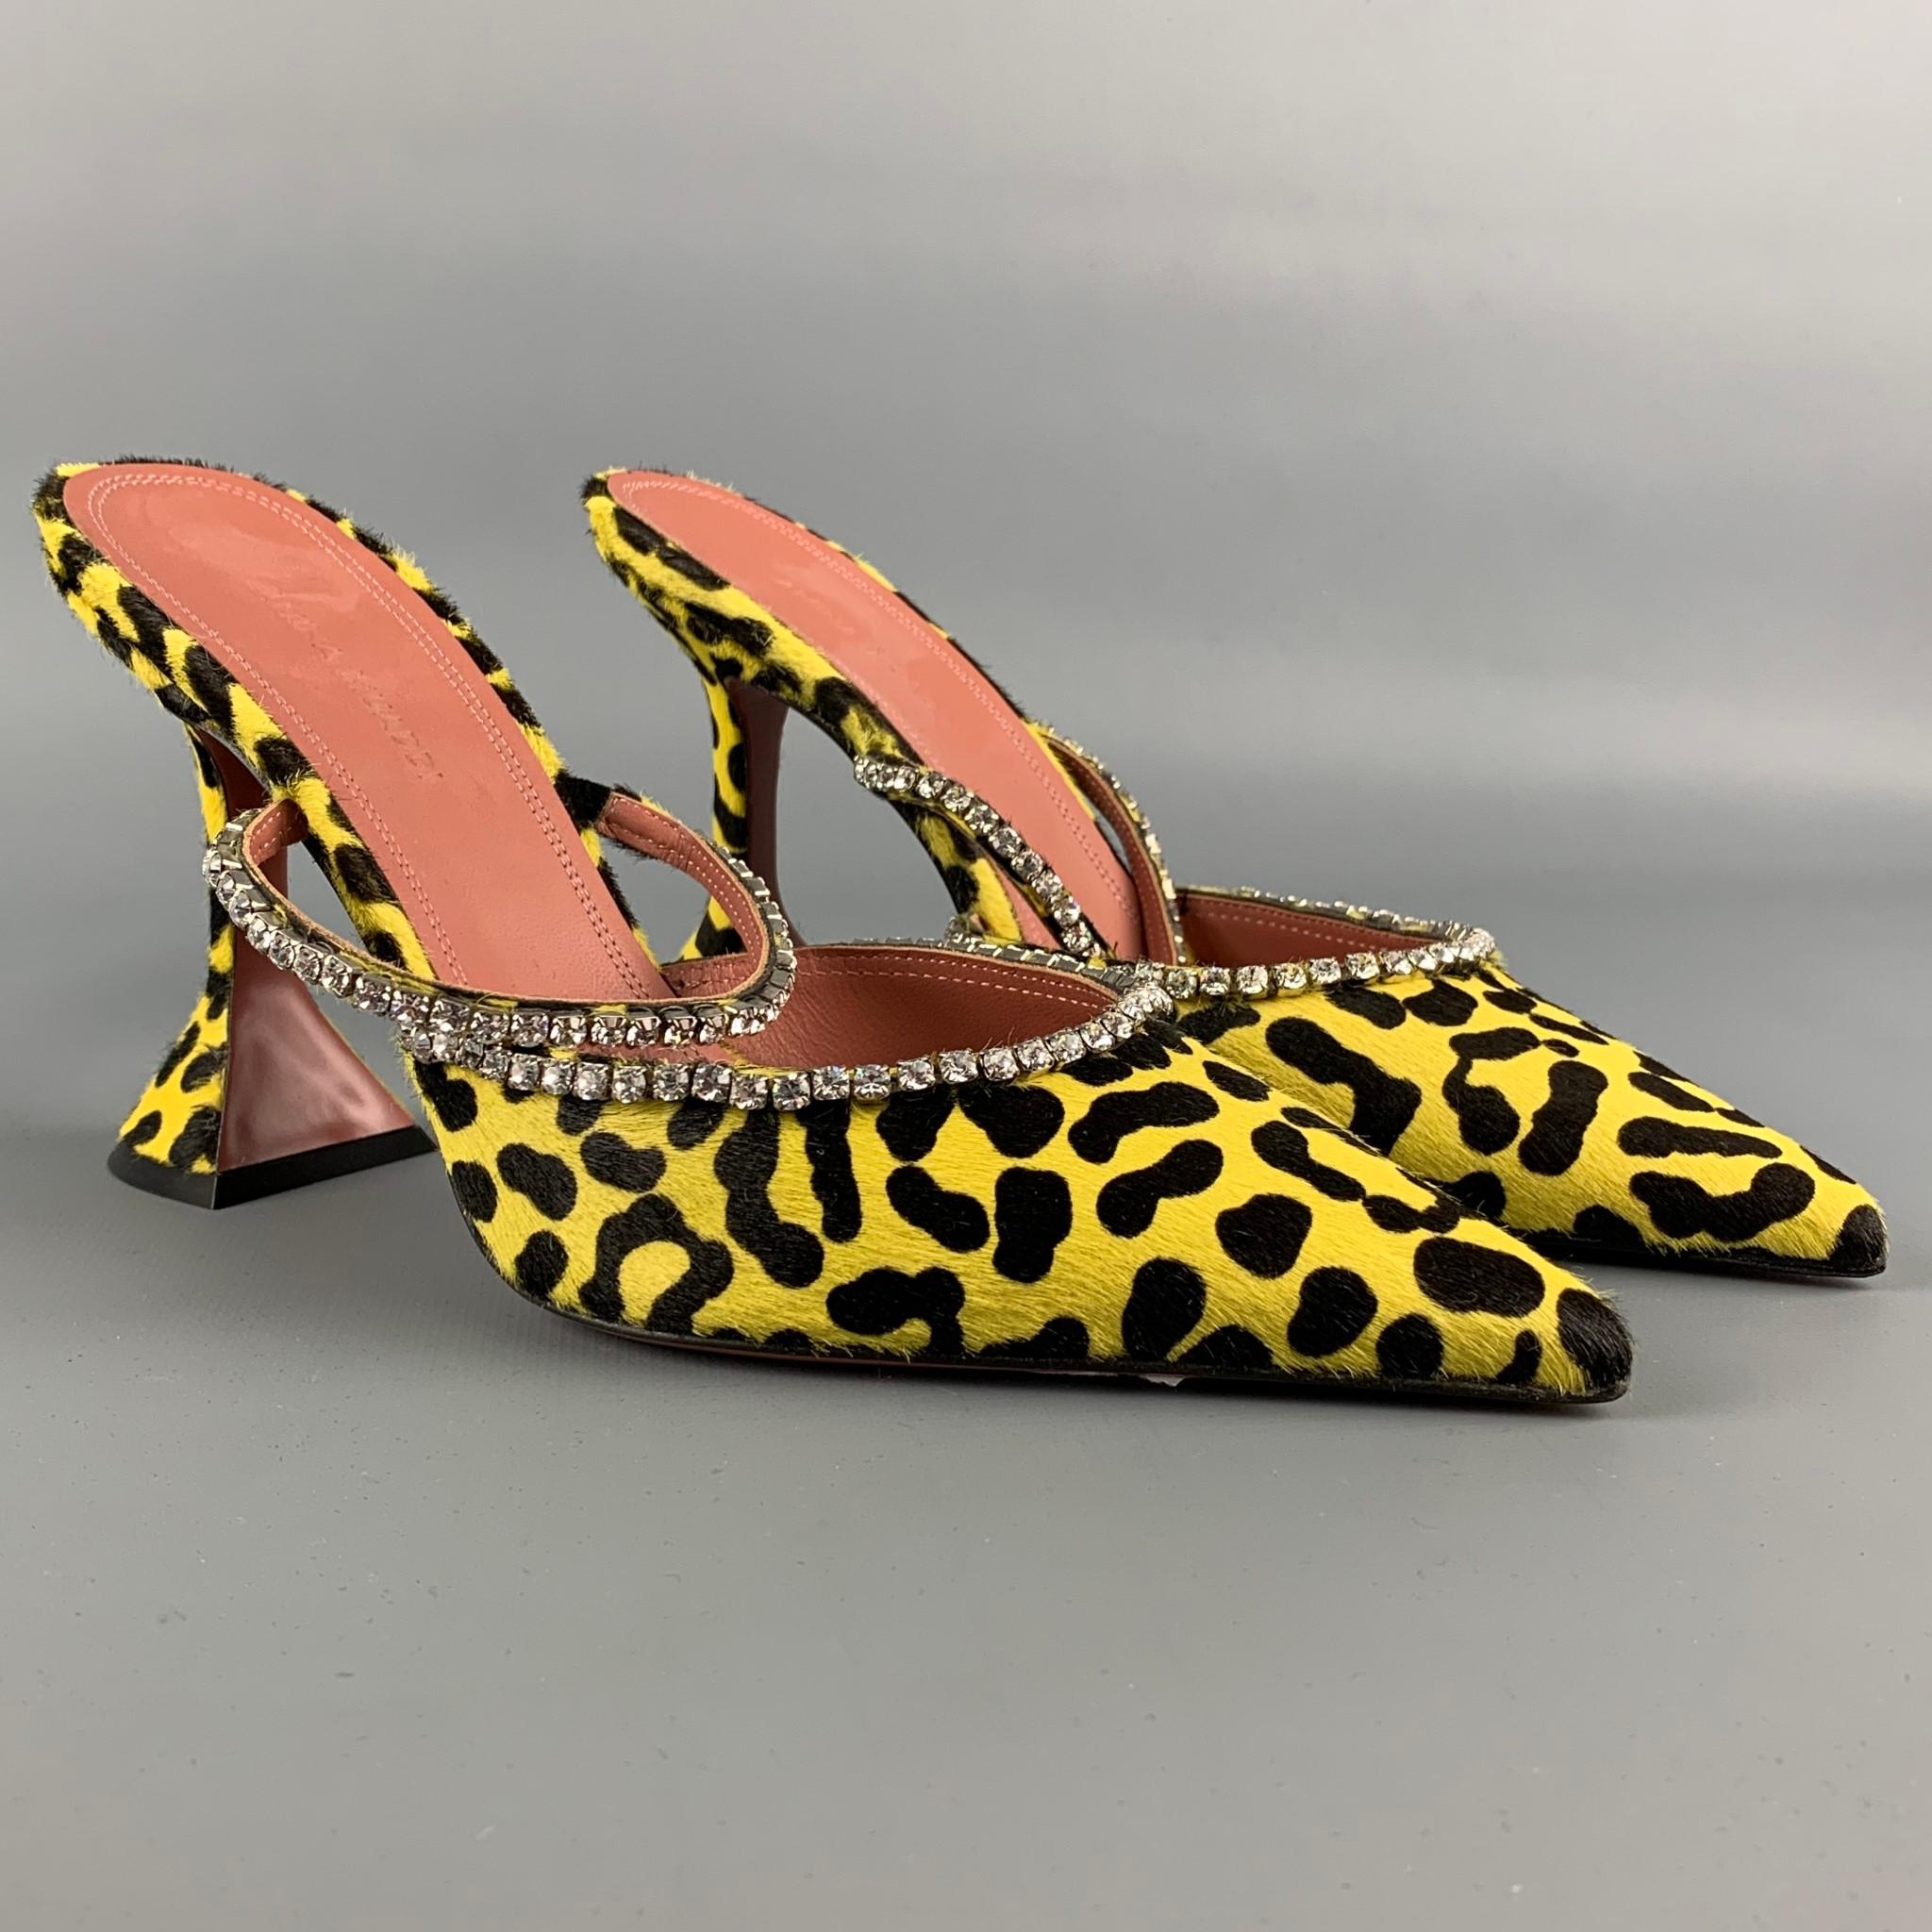 AMINA MUADDI pumps comes in a yellow & black animal print pony hair featuring a rhinestone strap detail, slip on, pointed toe, hourglass heel, and a wooden sole. Made in Italy.

New With Tags.
Marked: 38
Original Retail Price: